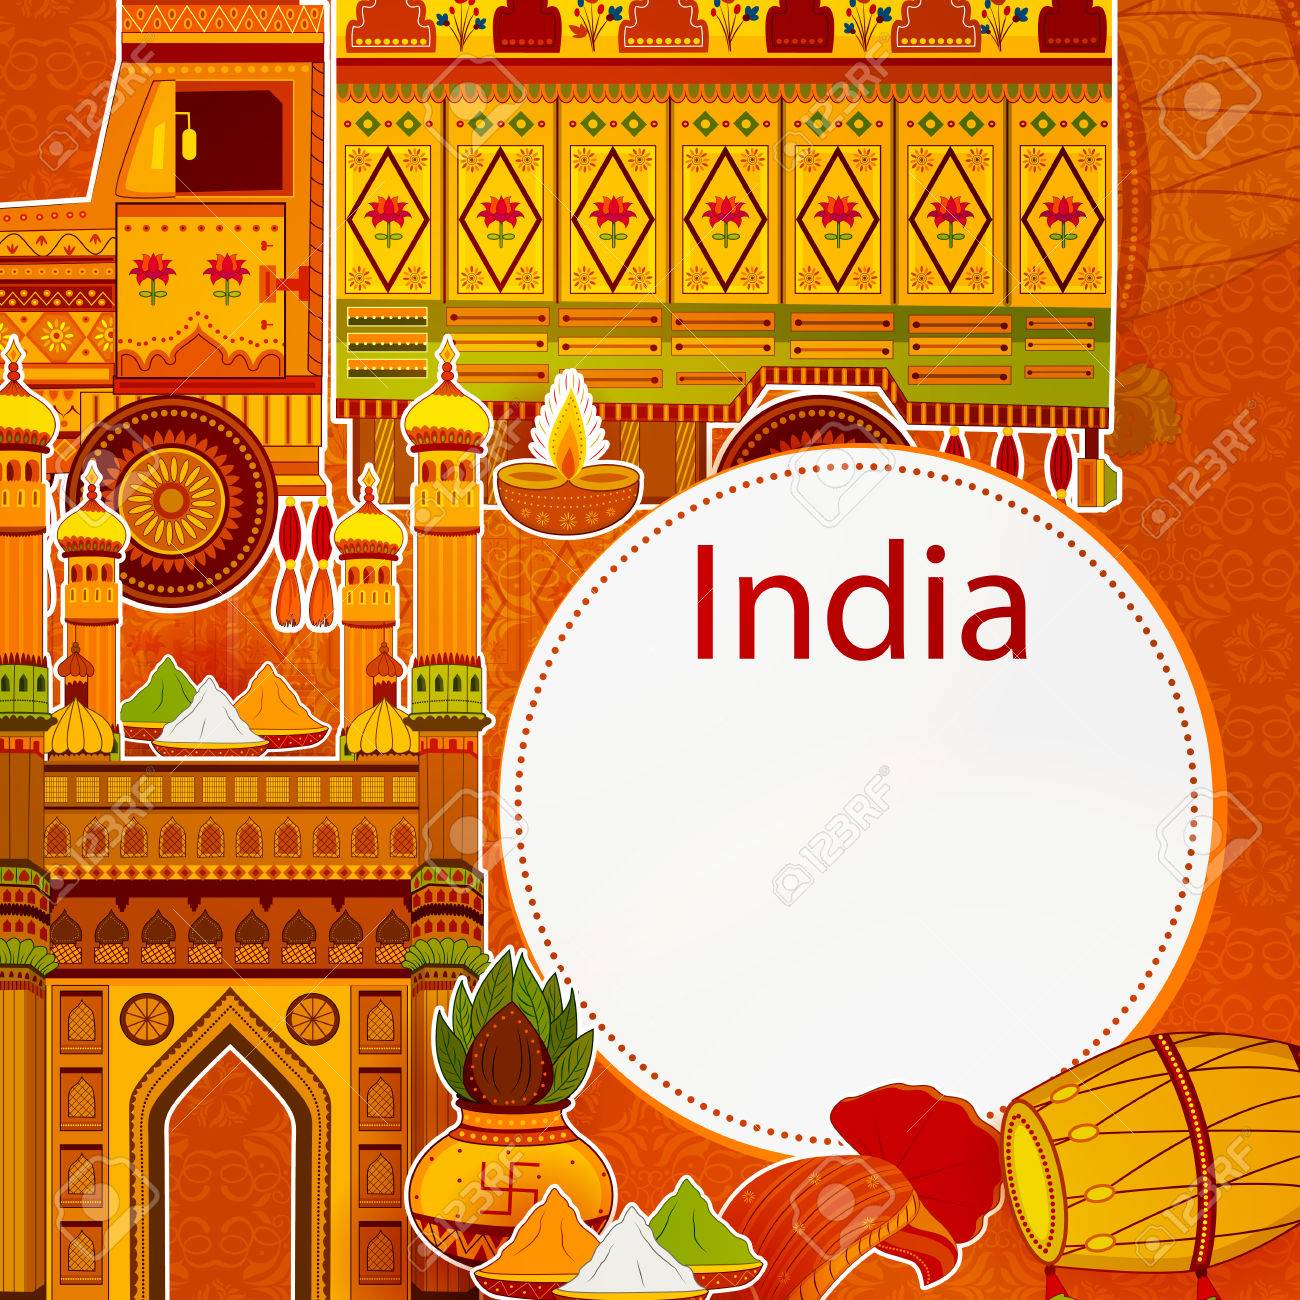 Free download Incredible India Background Depicting Indian